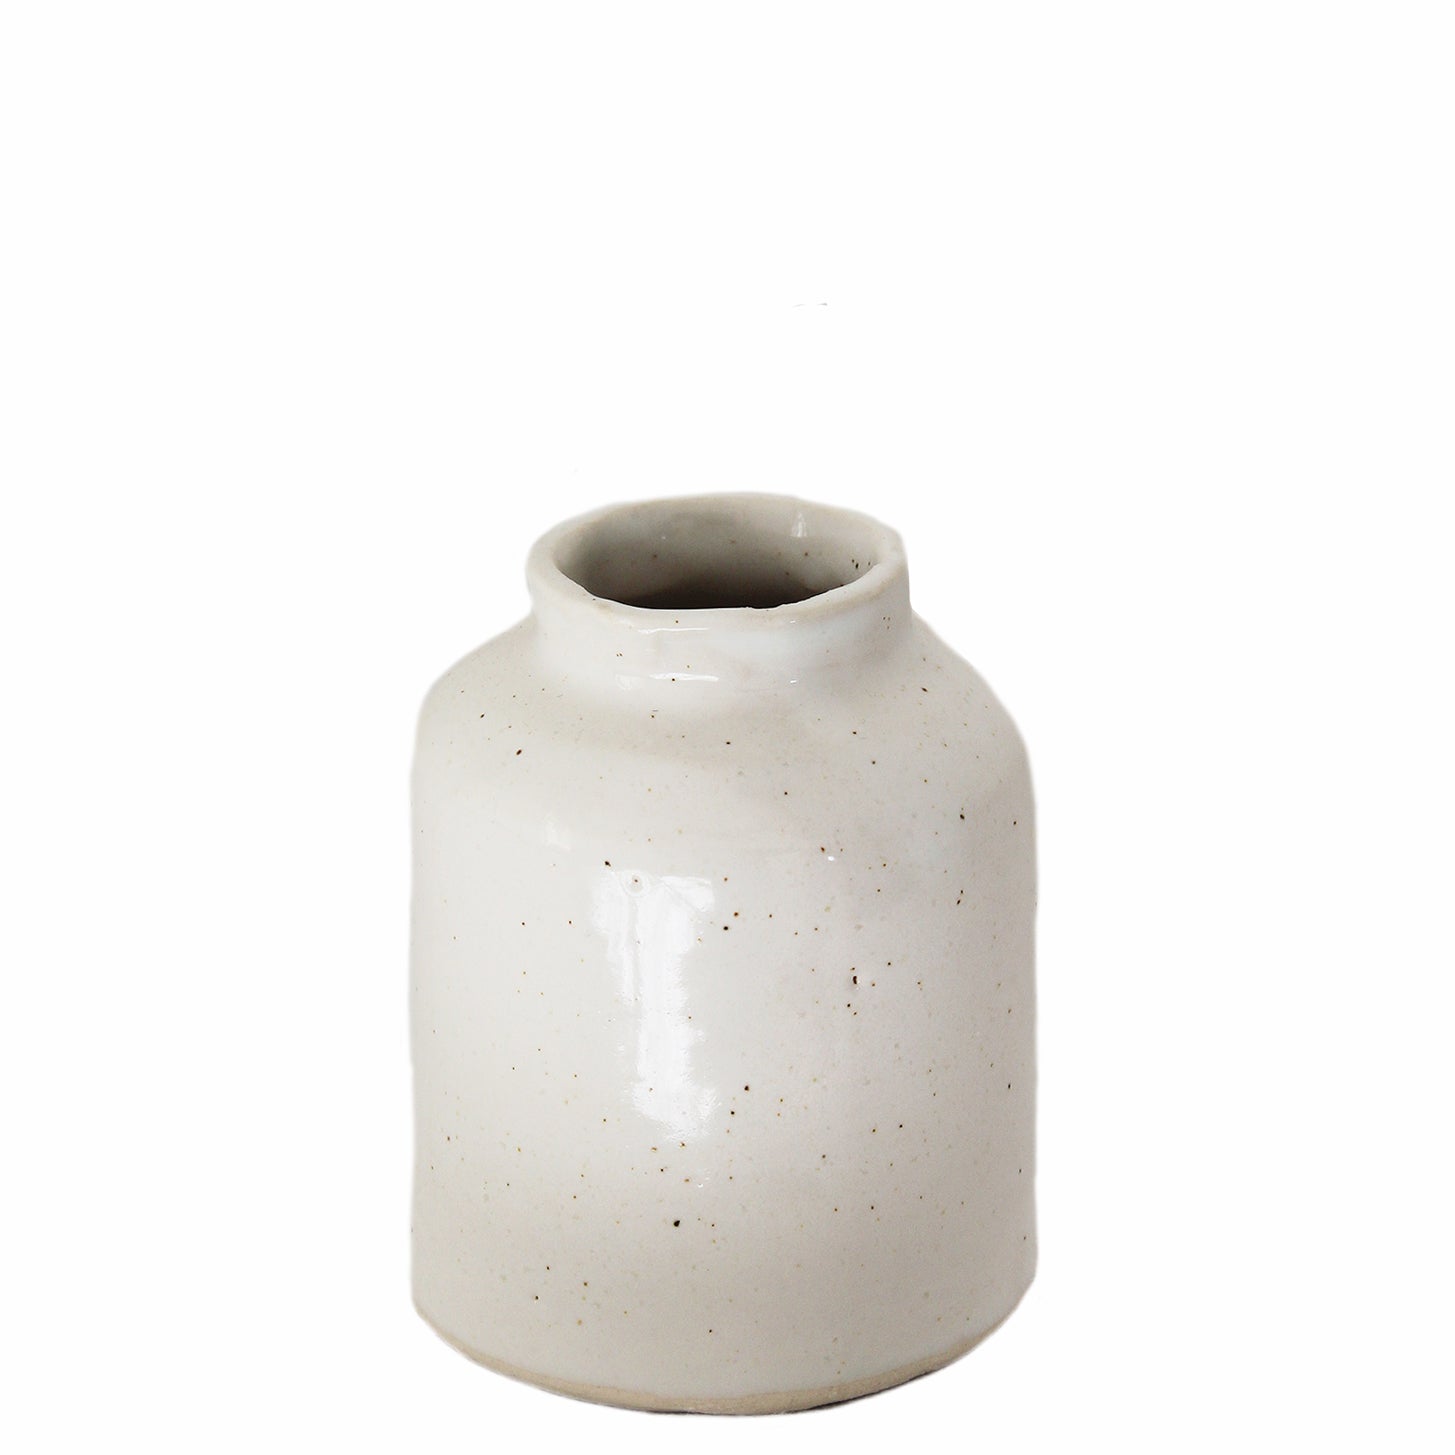 ceramic pot ideal for room fragrance perfume or flowers